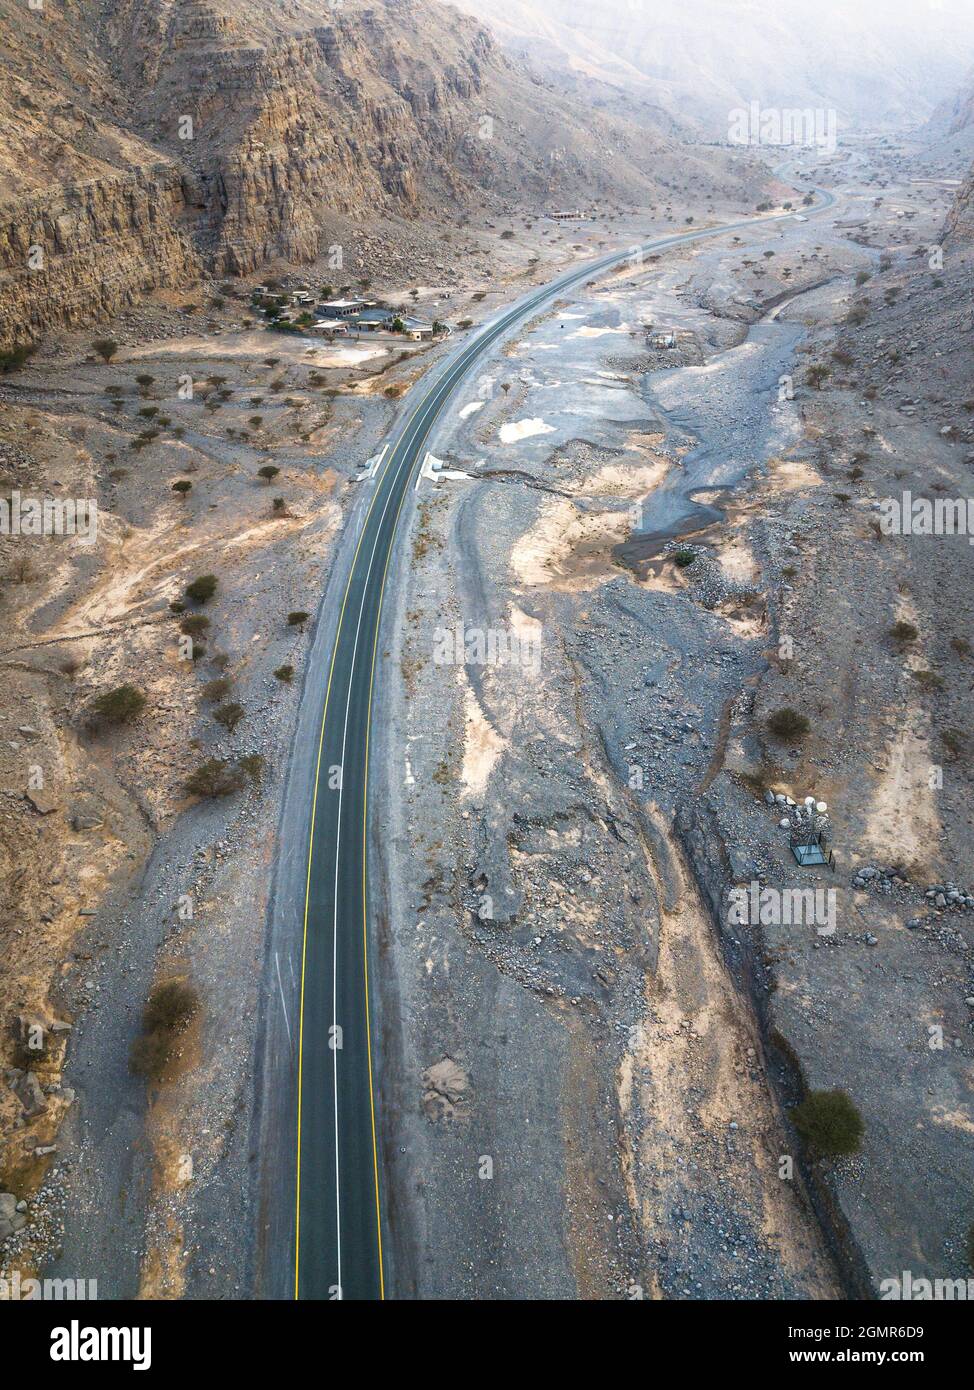 Aerial view of Jebel Jais mountain desert highway road surrounded by sandstones in Ras al Khaimah emirate of the United Arab Emirates Stock Photo